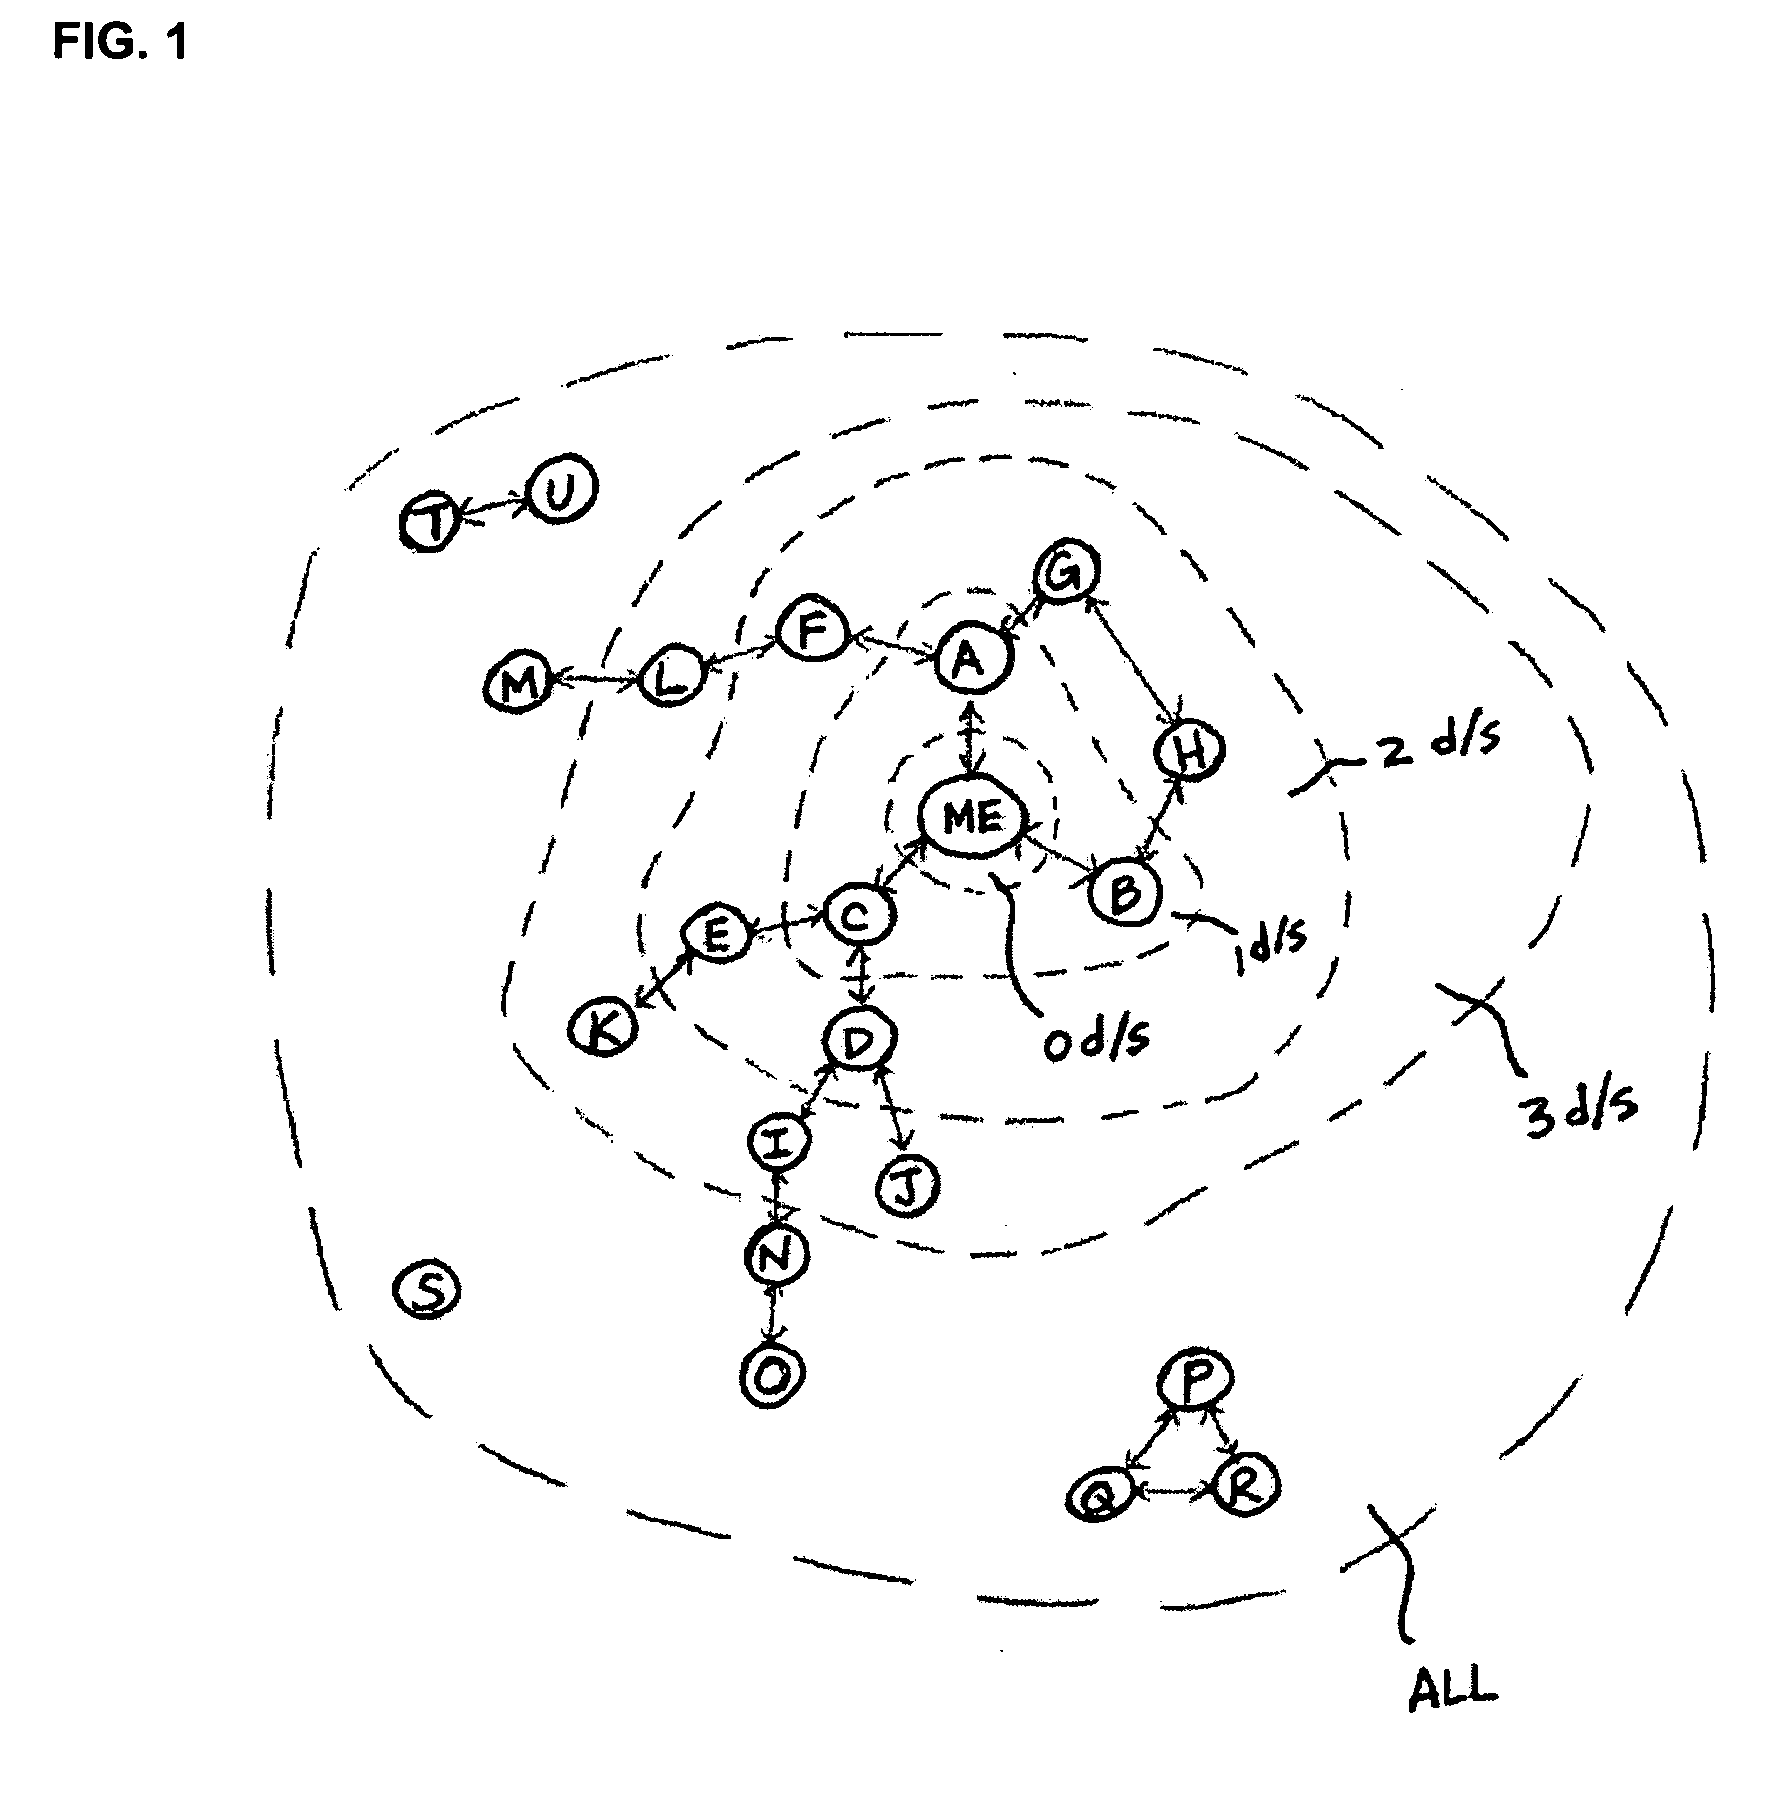 System and method for managing information flow between members of an online social network